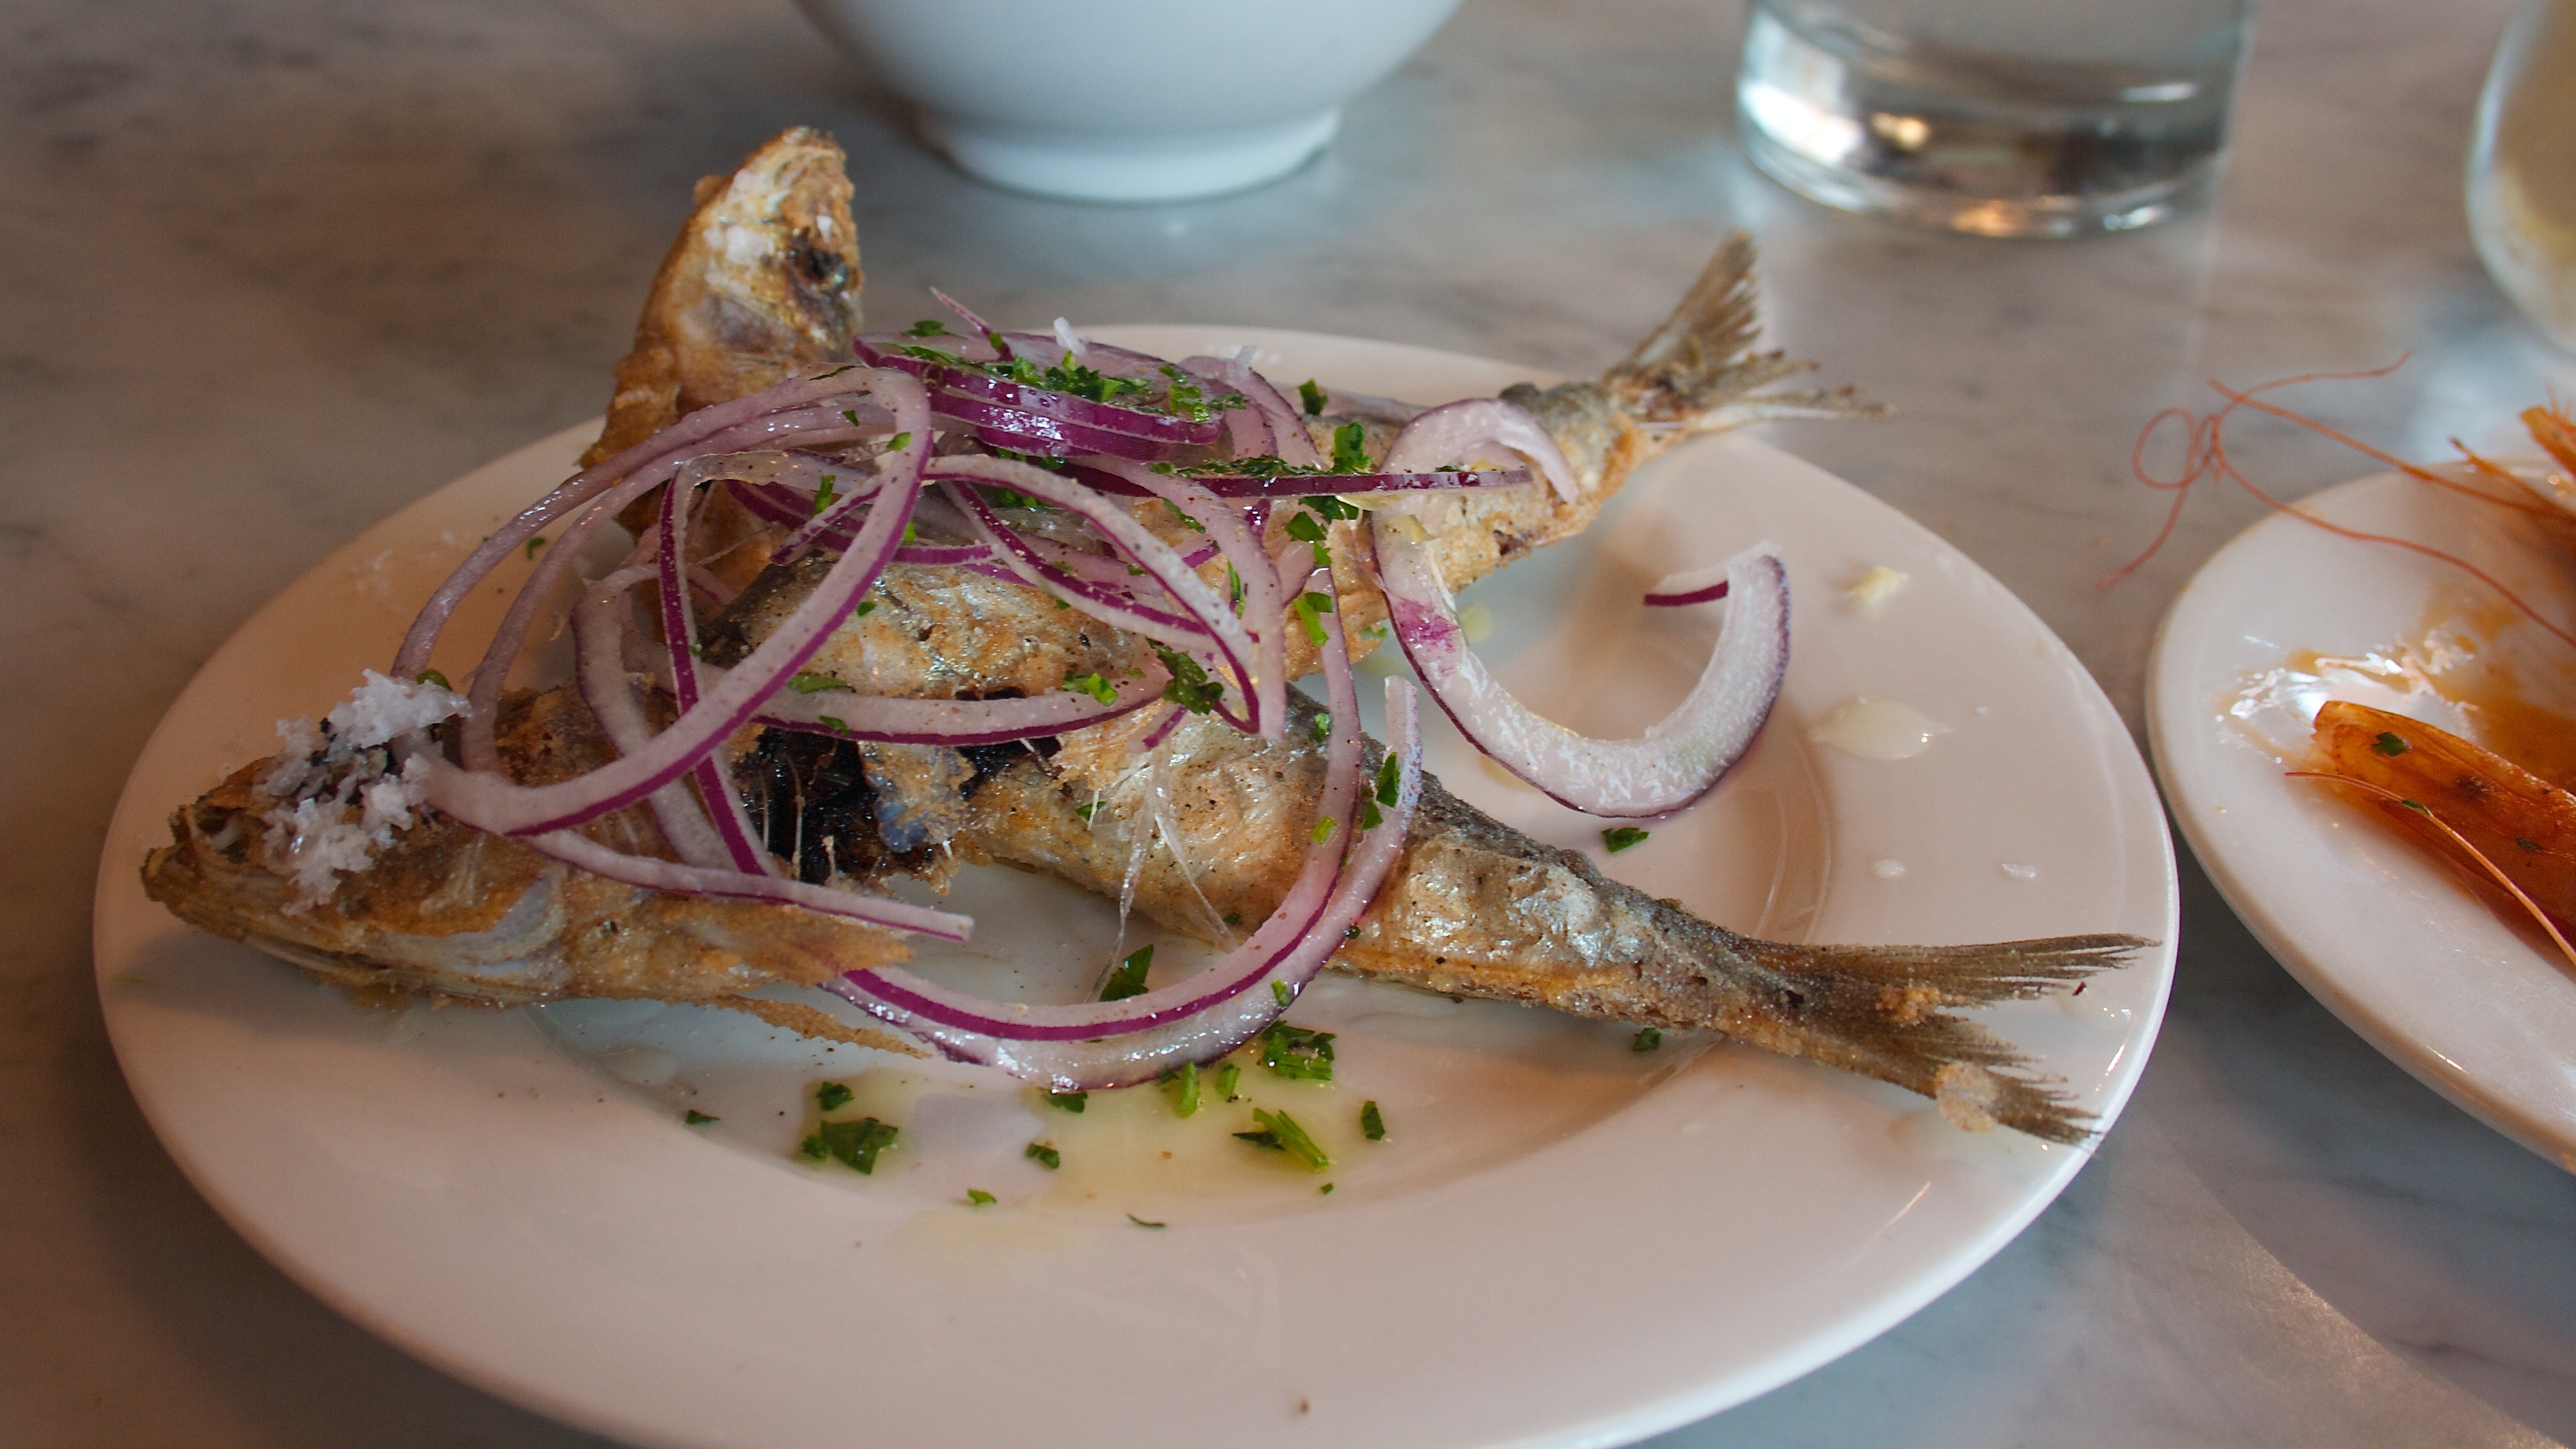 Fried sardines garnished with red onion and greens